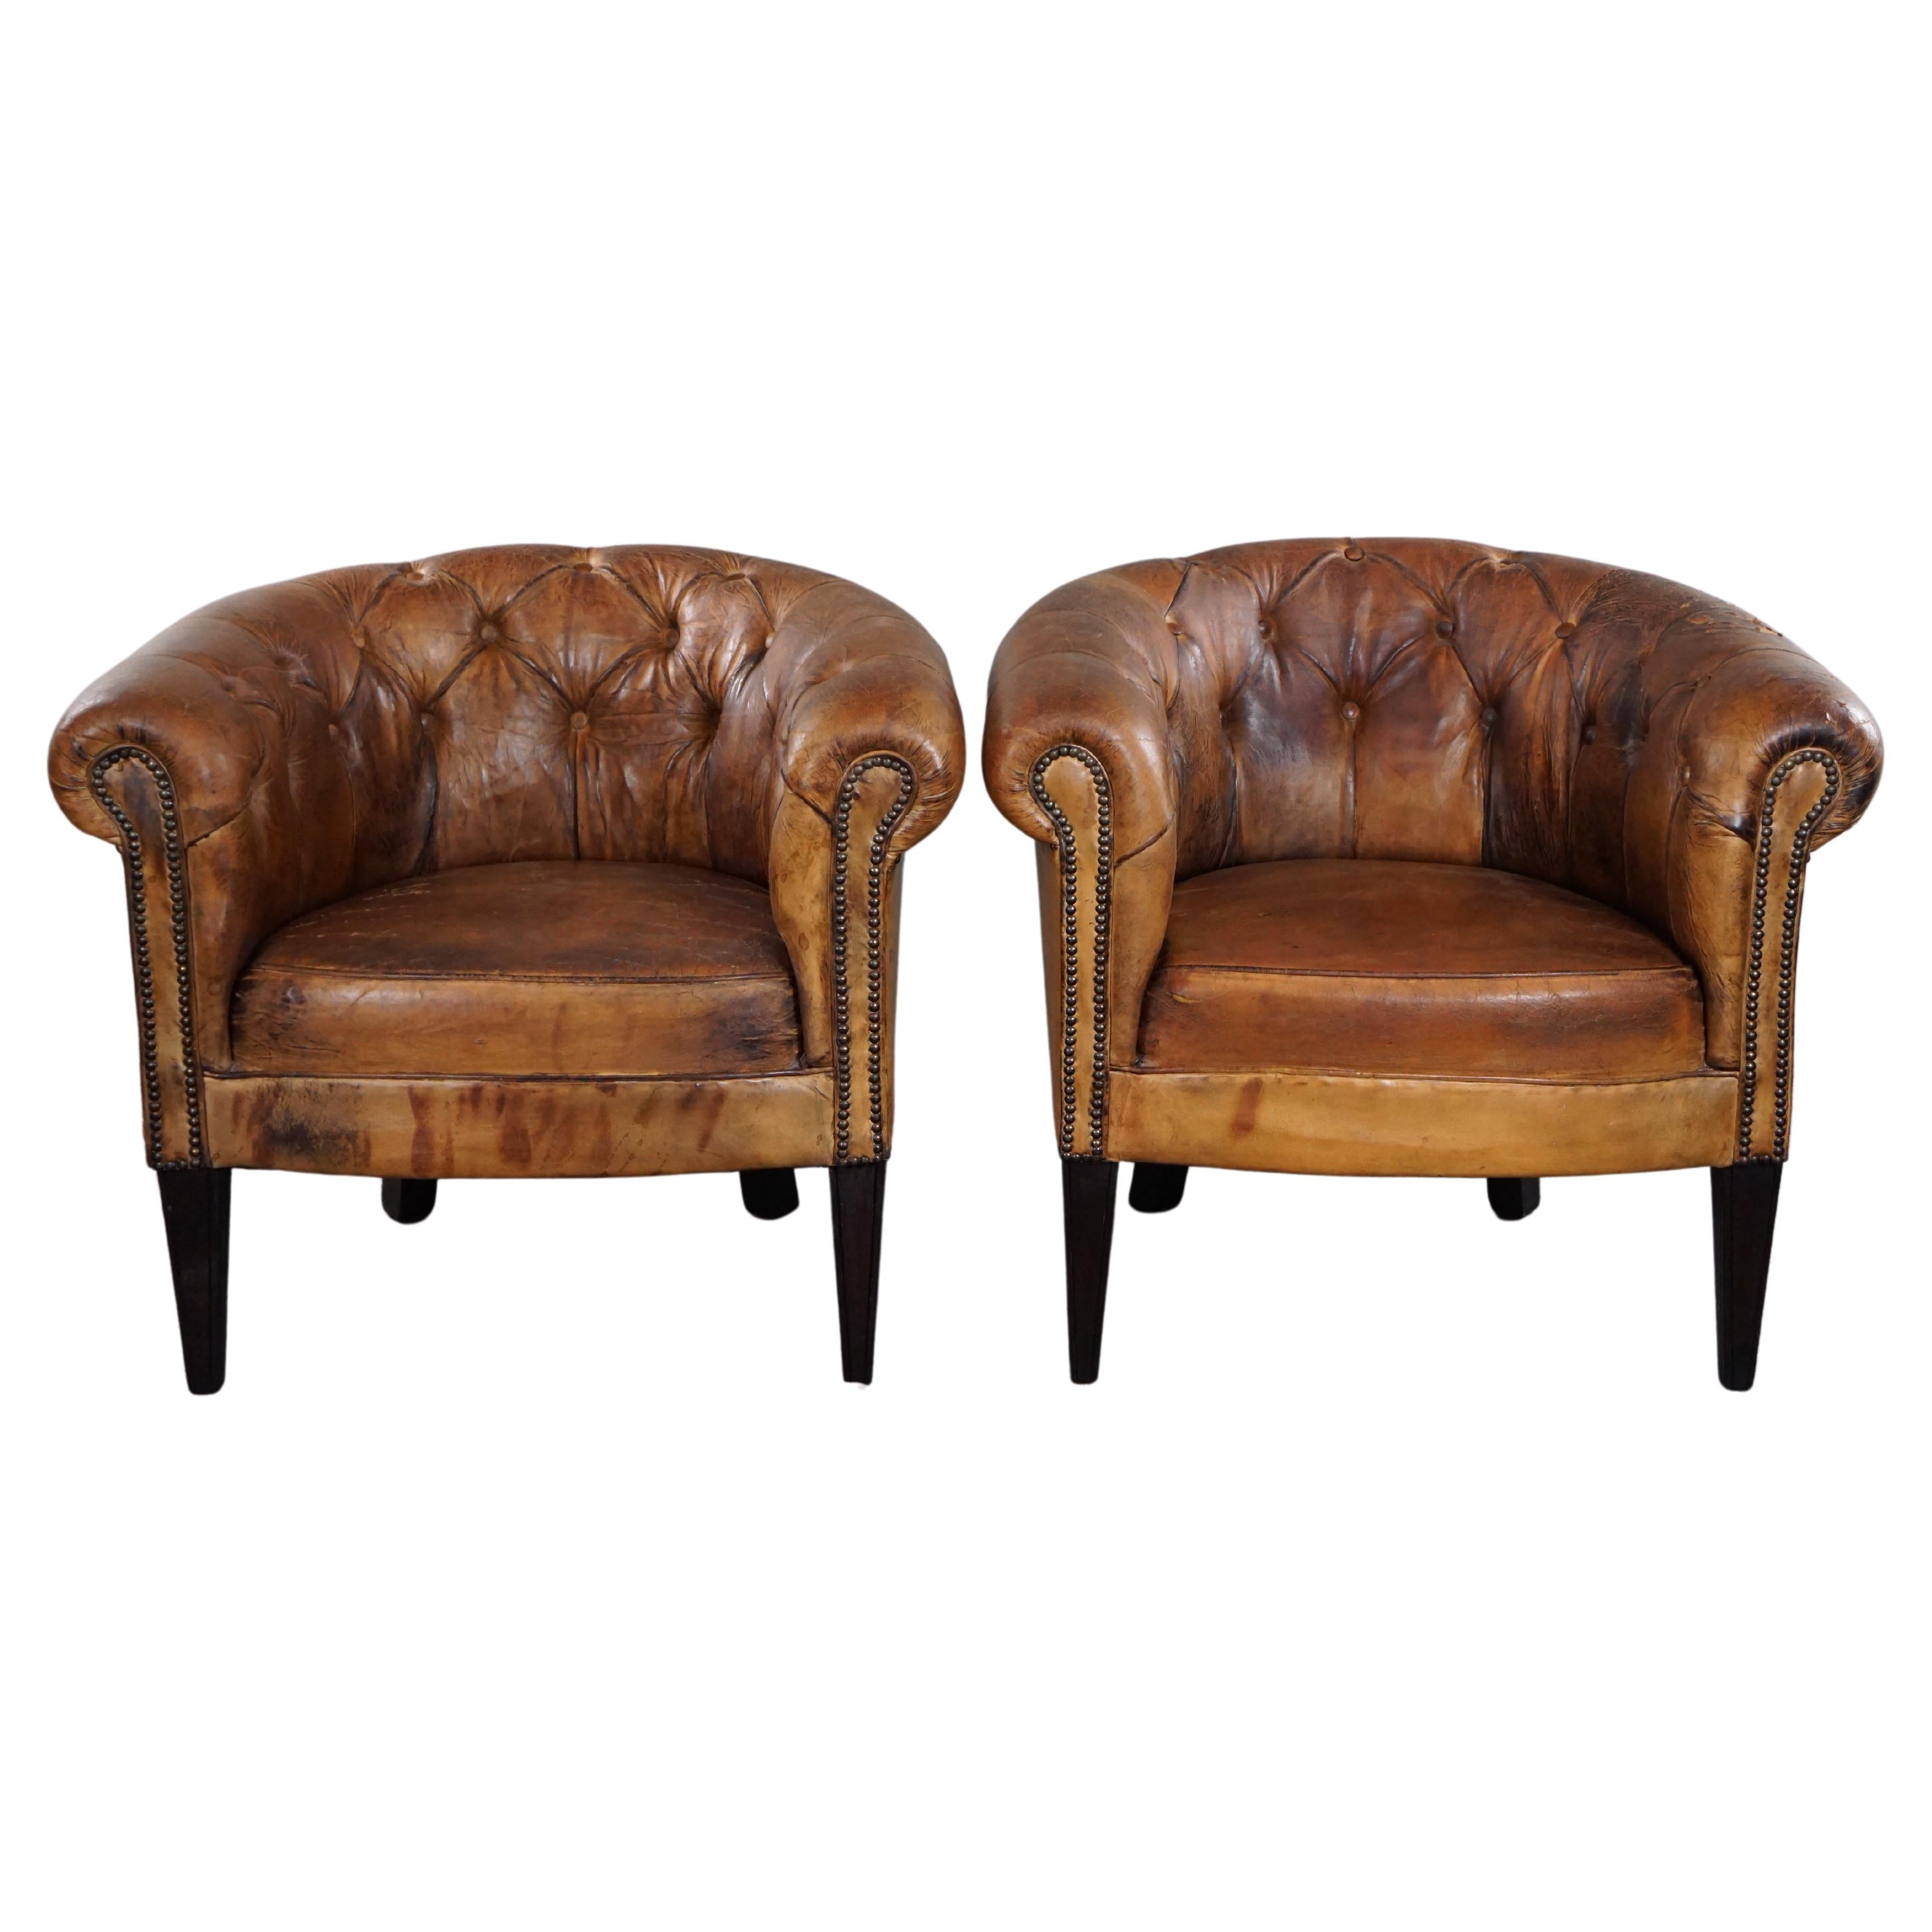 "Set of two super sturdy old sheep leather Chesterfield club armchairs" For Sale